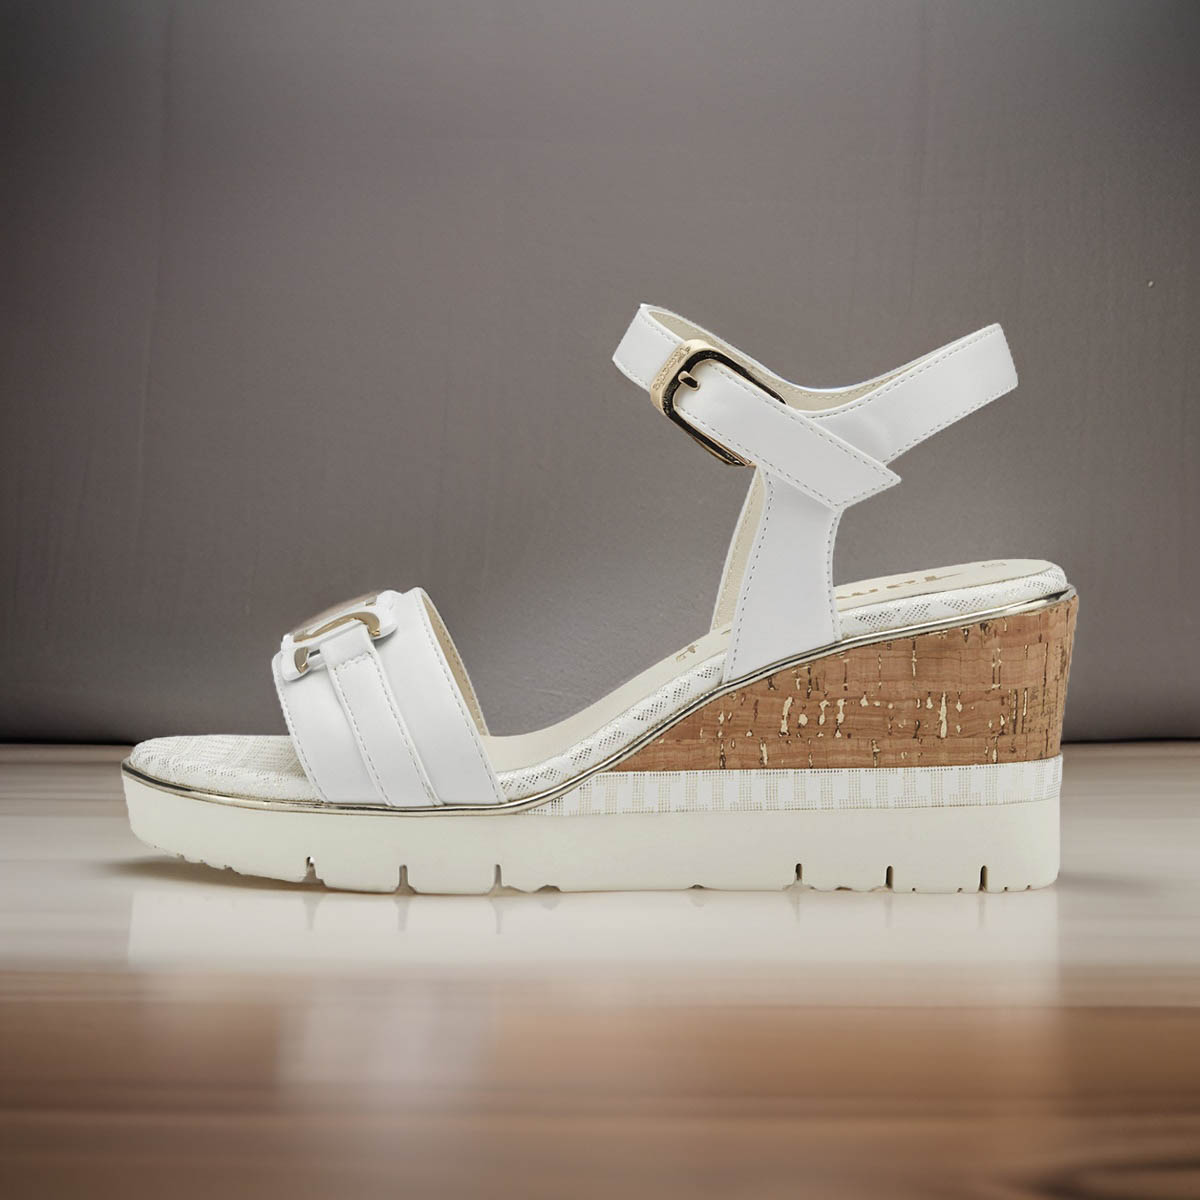 Tamaris White Wedge Sandals with Gold Chain Detail